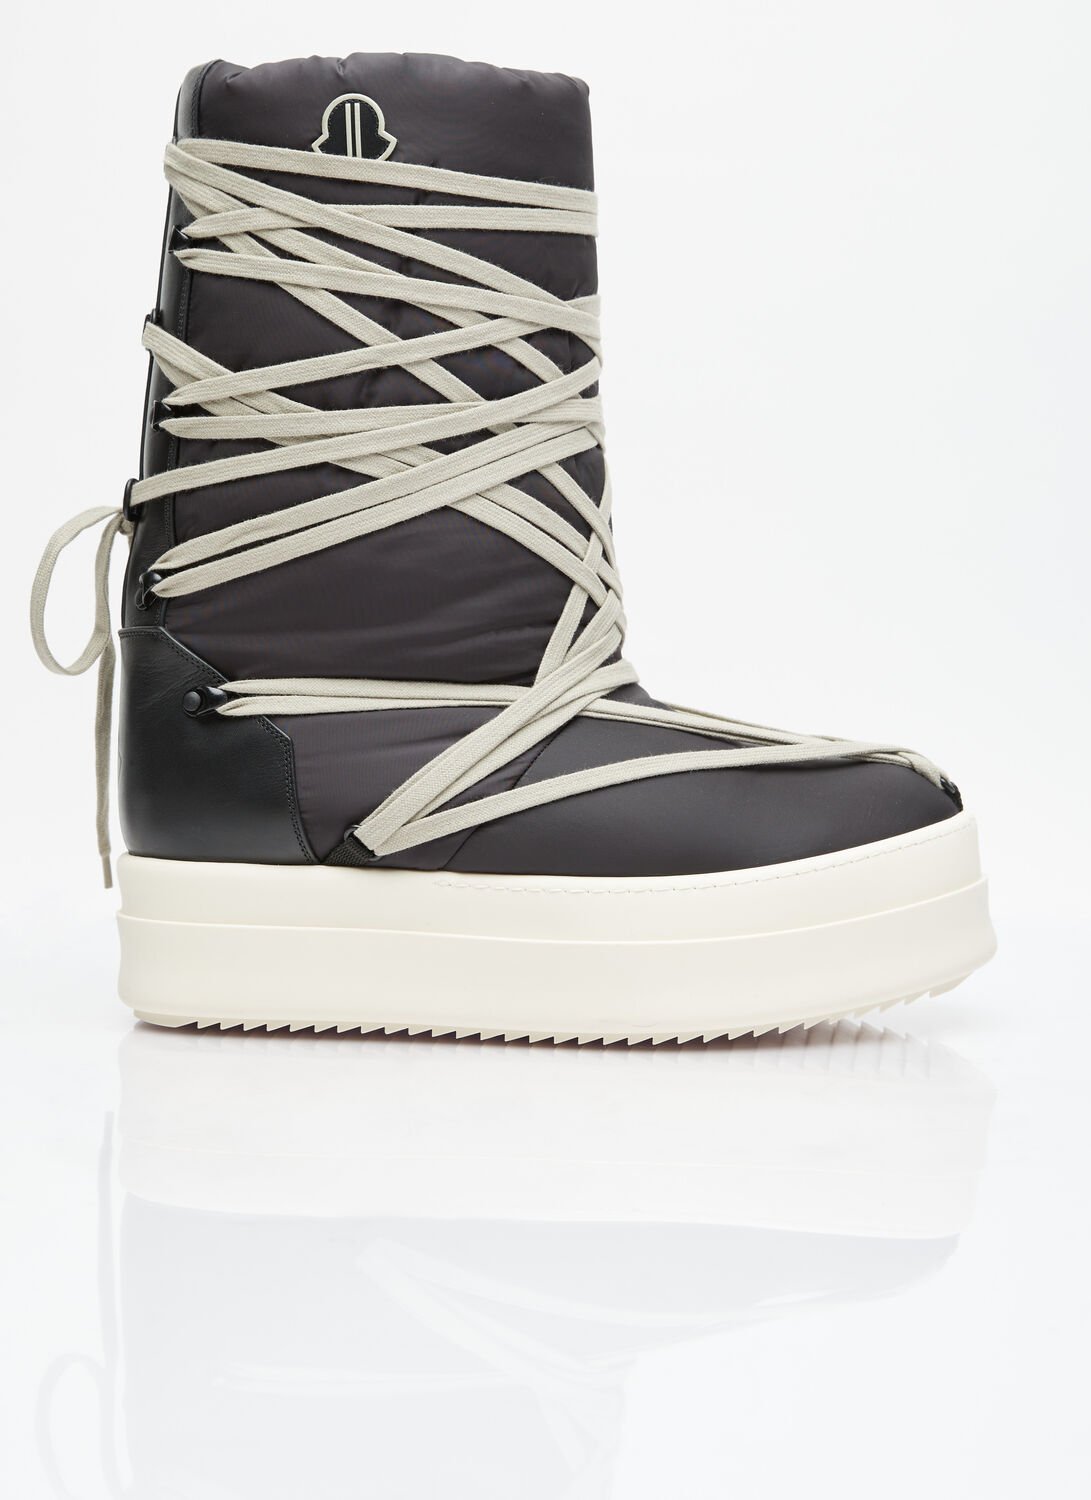 Moncler X Rick Owens Big Rocks Leather Boots In Black